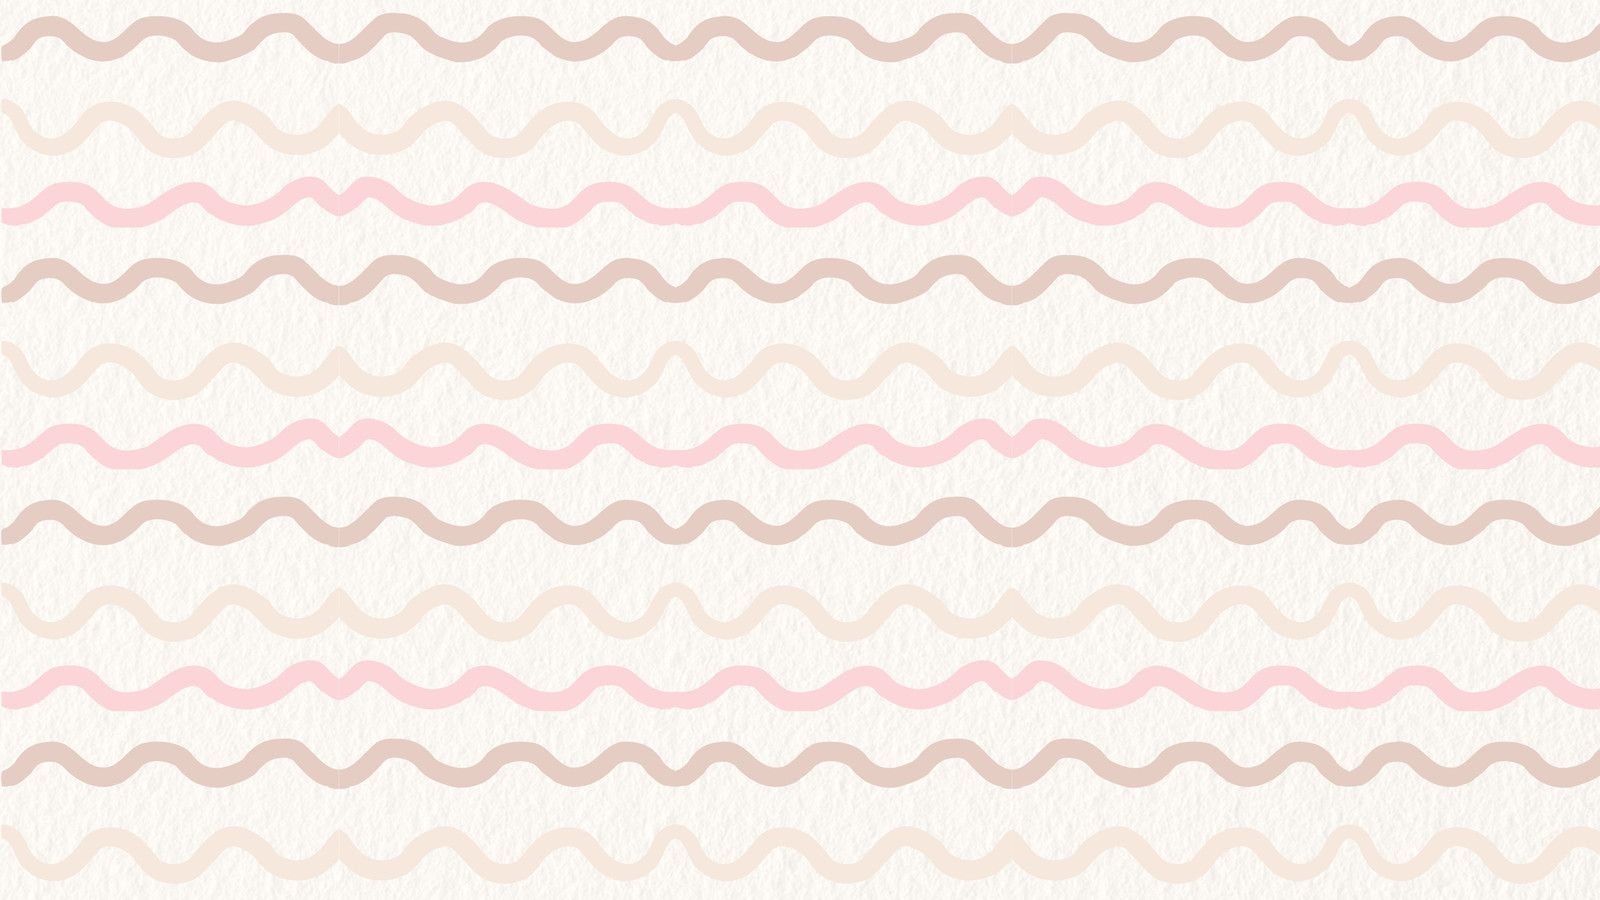 A background image with a wavy pattern - Blush